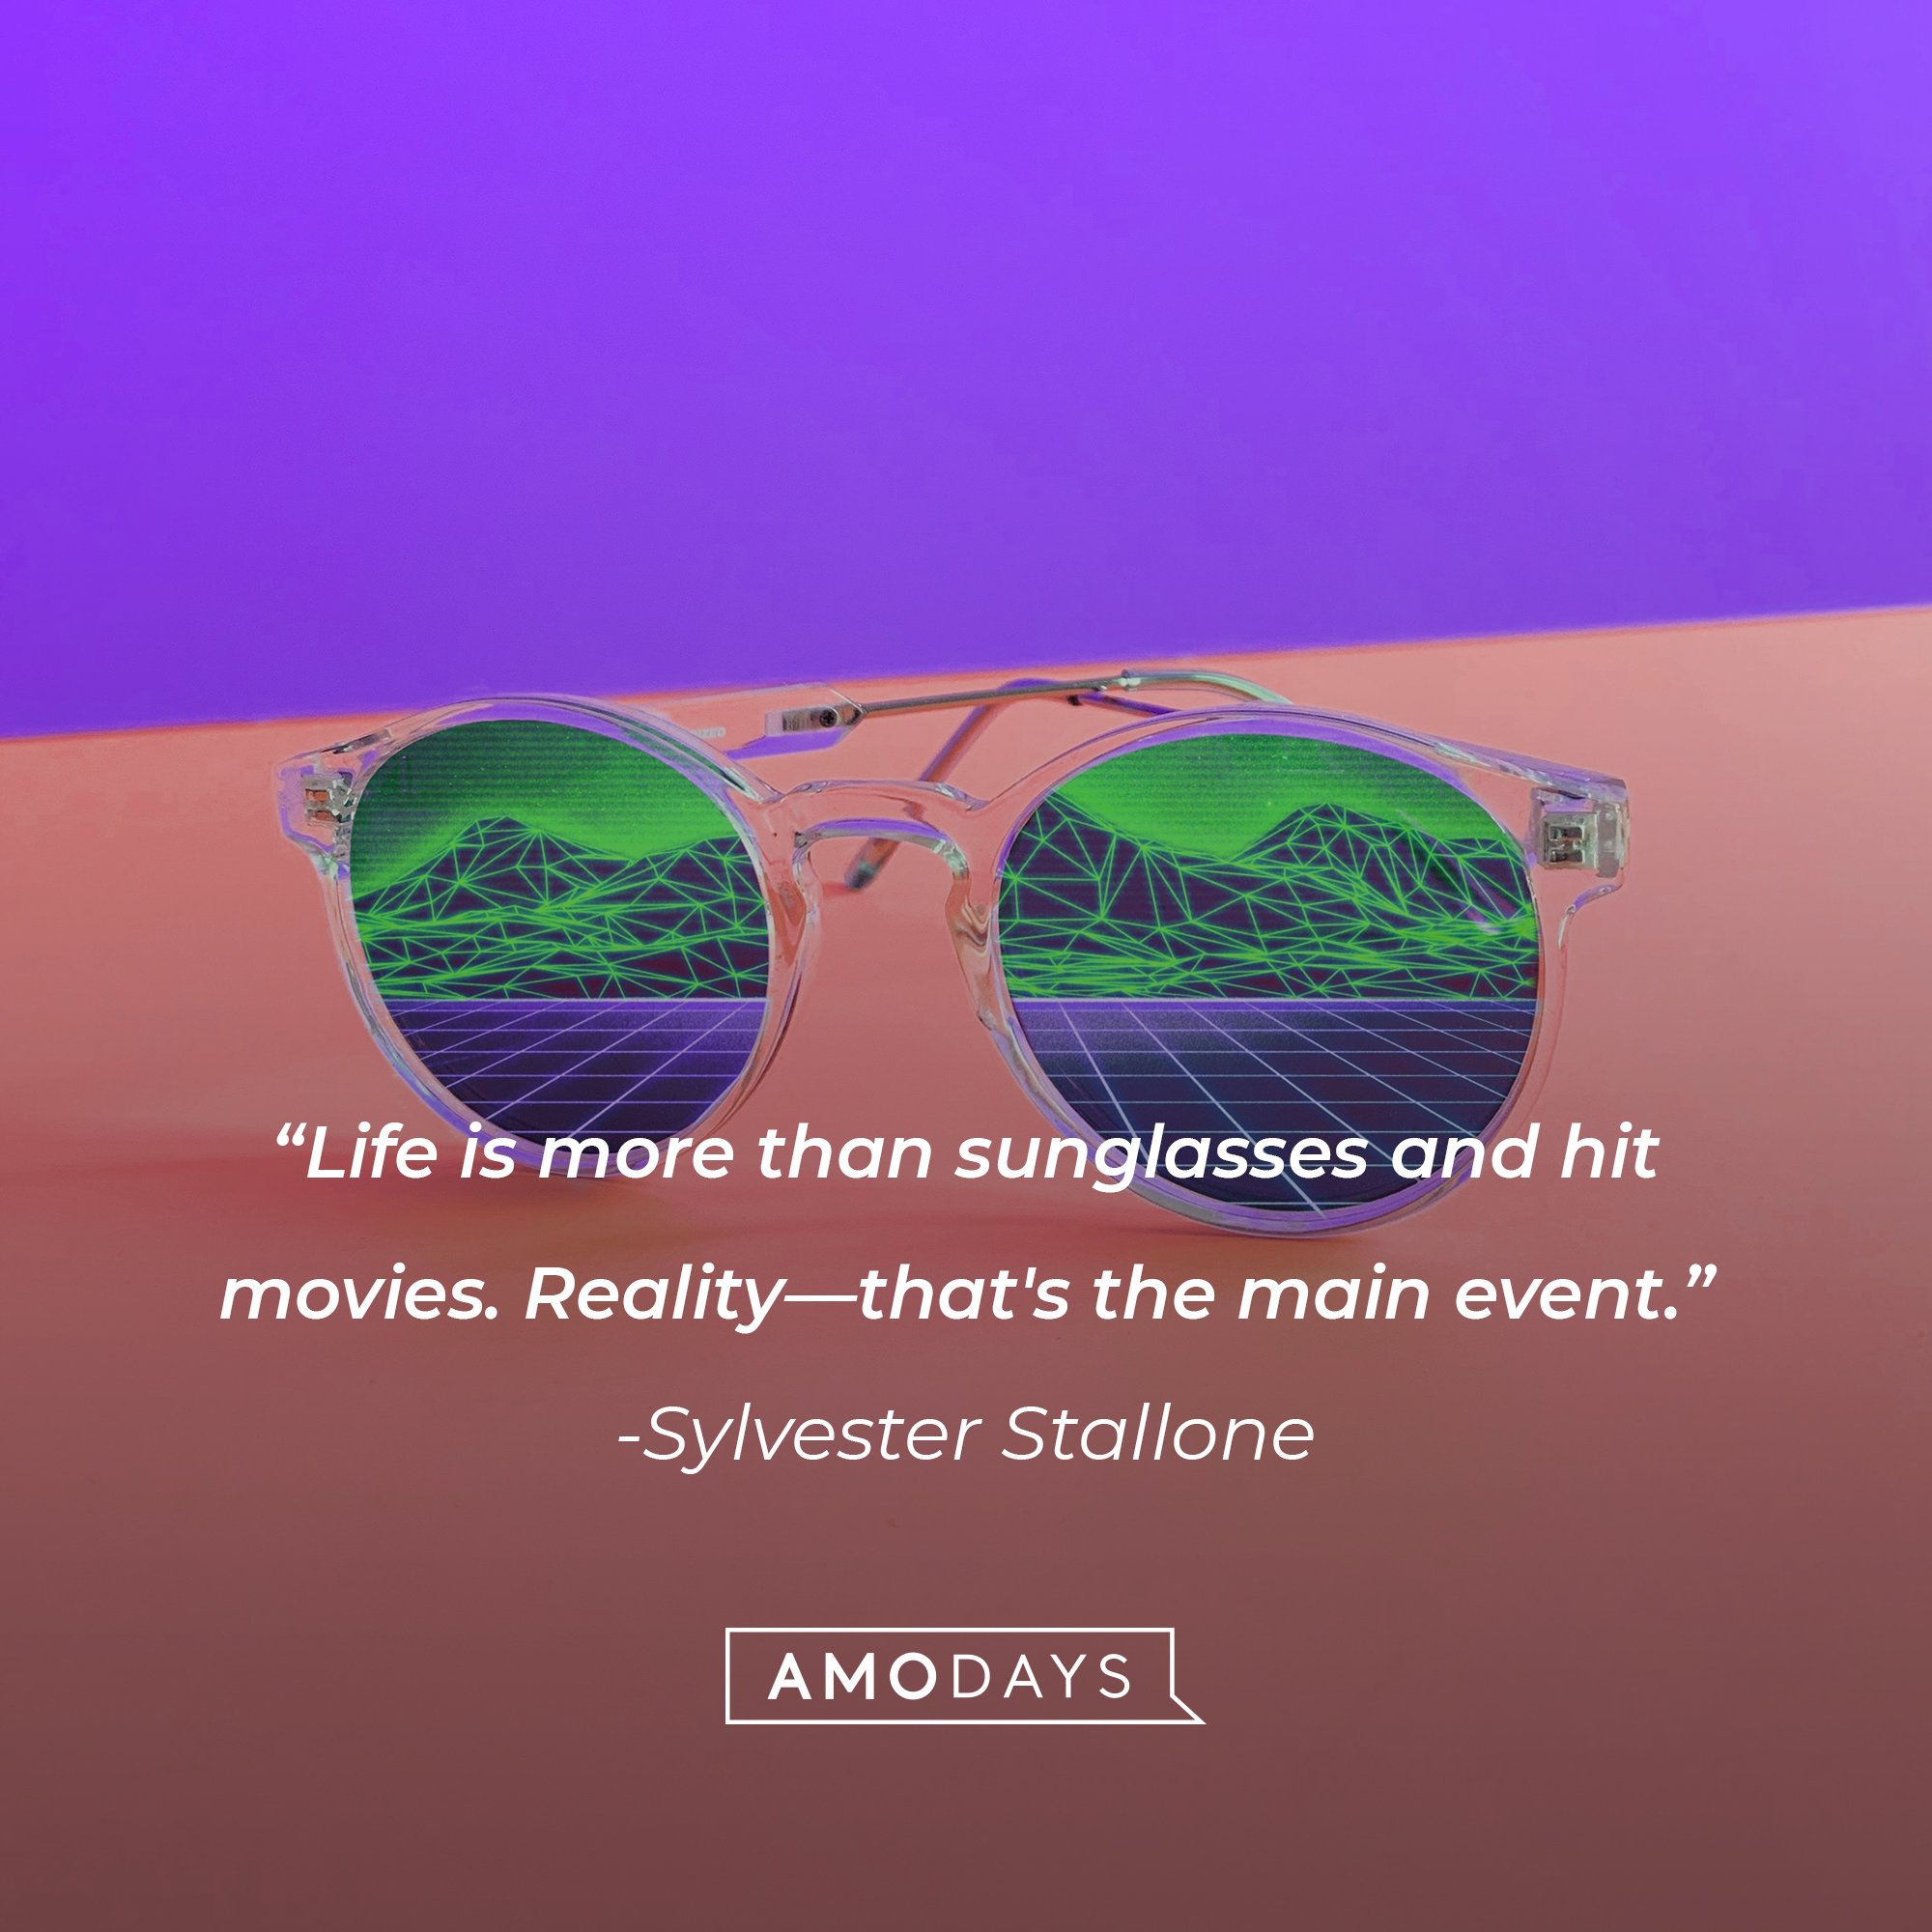 Sylvester Stallone’s quote: "Life is more than sunglasses and hit movies. Reality—that's the main event." | Image: AmoDays  